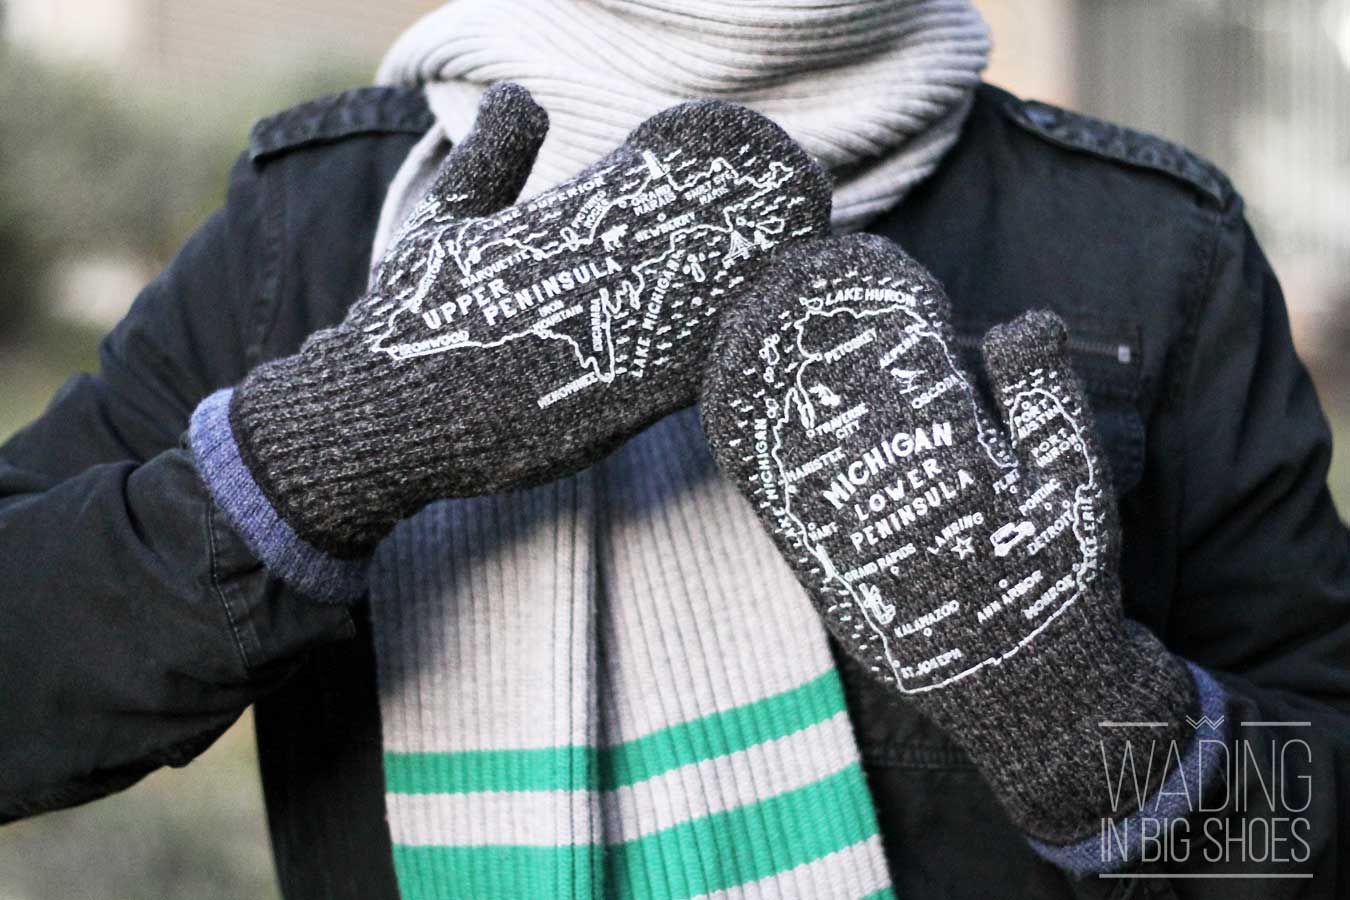 These 'Superior' Mittens Are Designed With Yoopers In Mind | Wading in Big Shoes